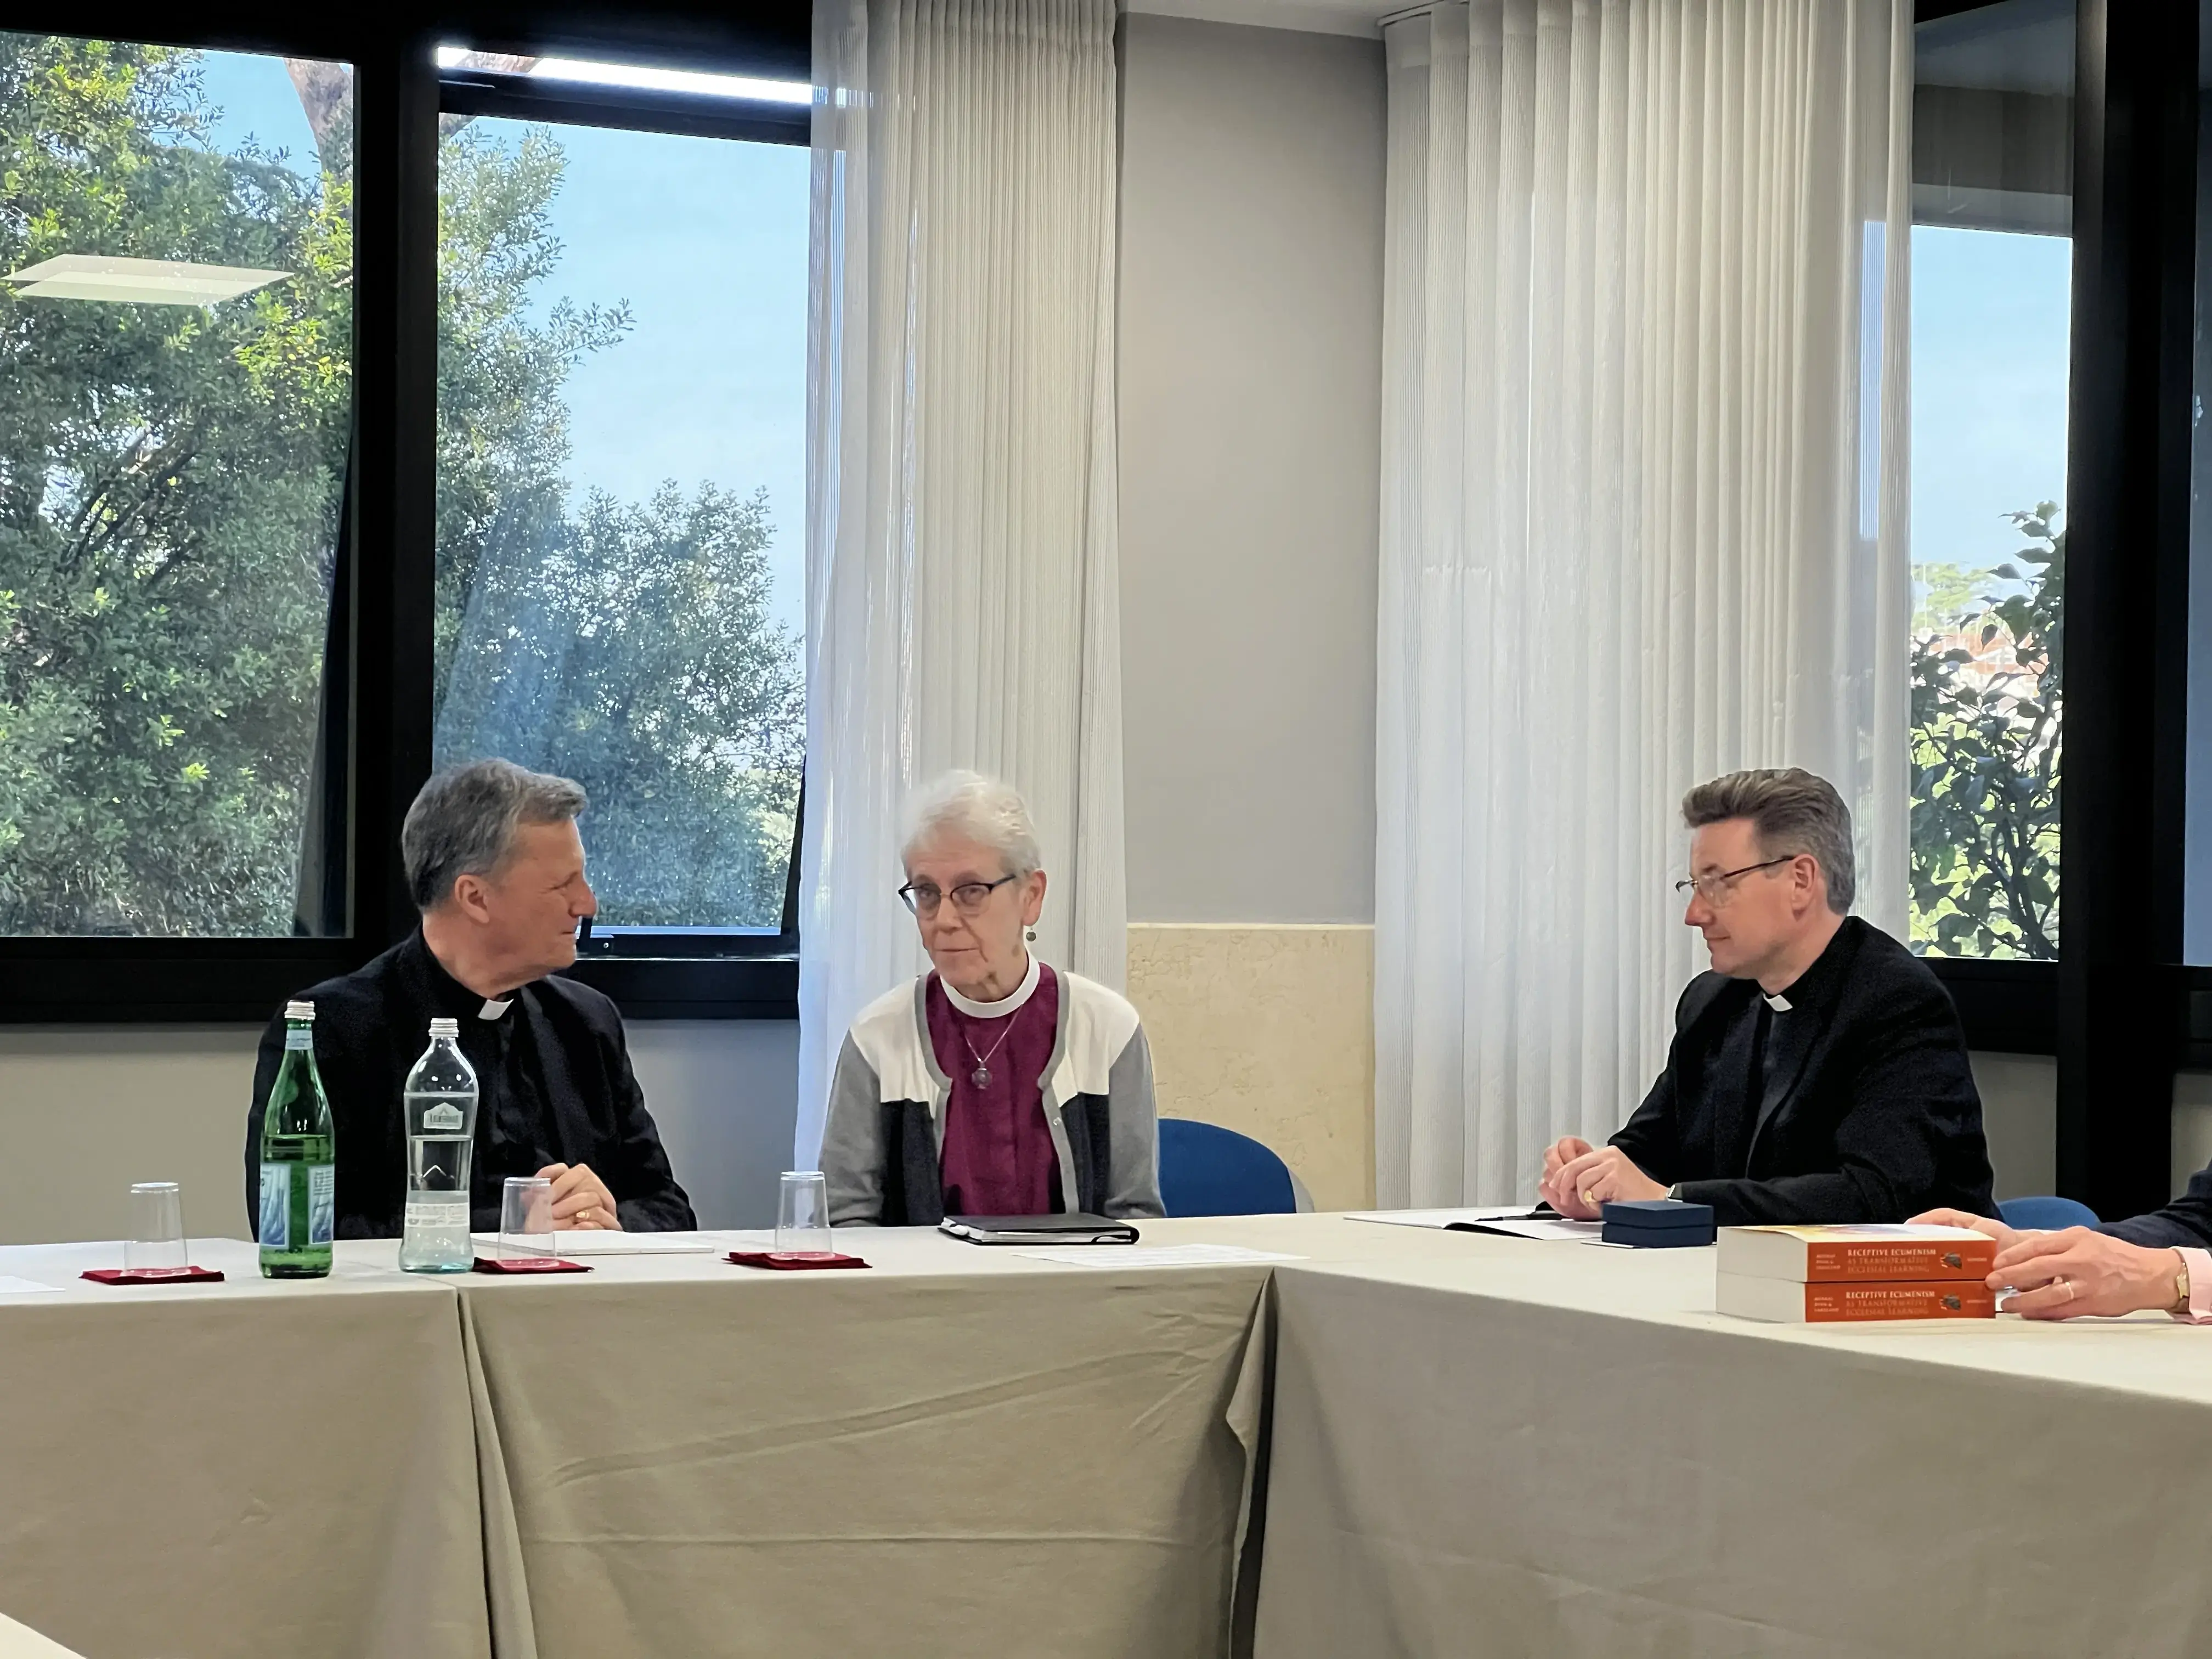 ARCIC-III meets with Synod leaders Cardinal Grech & Sr Natalie Becquart